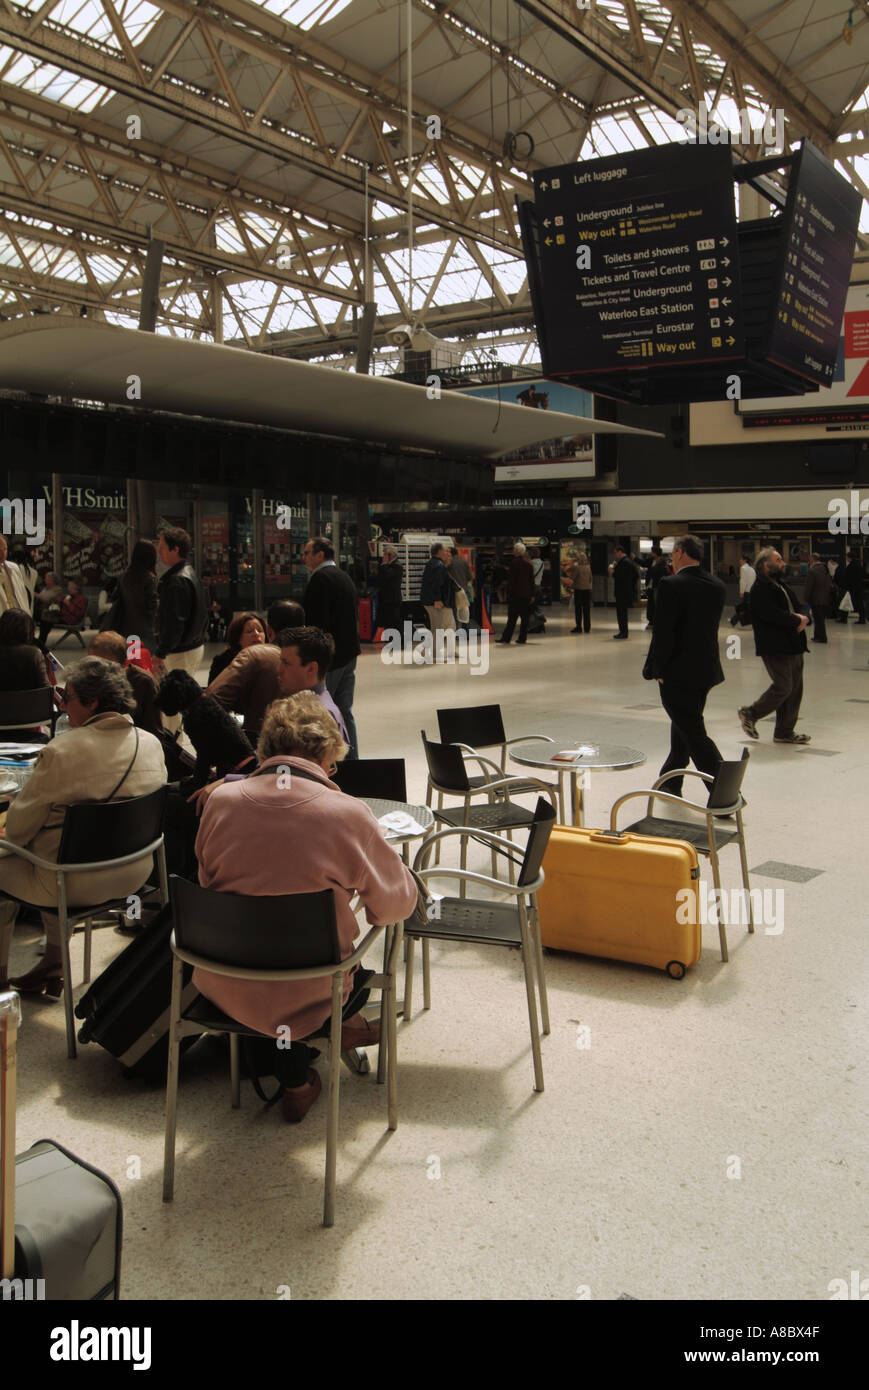 Waterloo railway station concourse people sitting at snack bar tables with possible unattended yellow suitcase Stock Photo